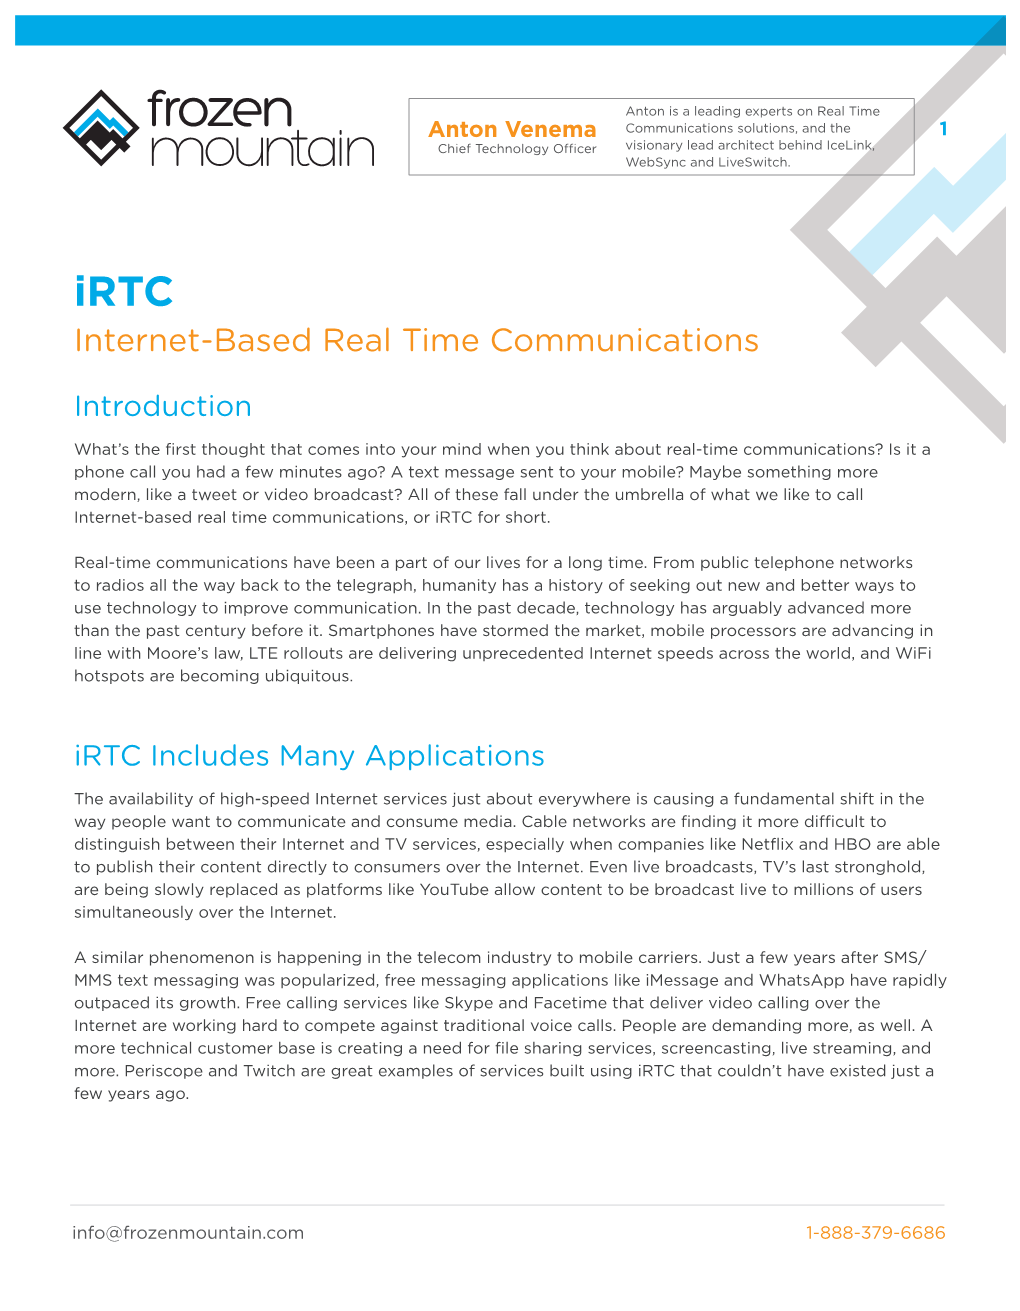 A Framework for Real-Time Communications